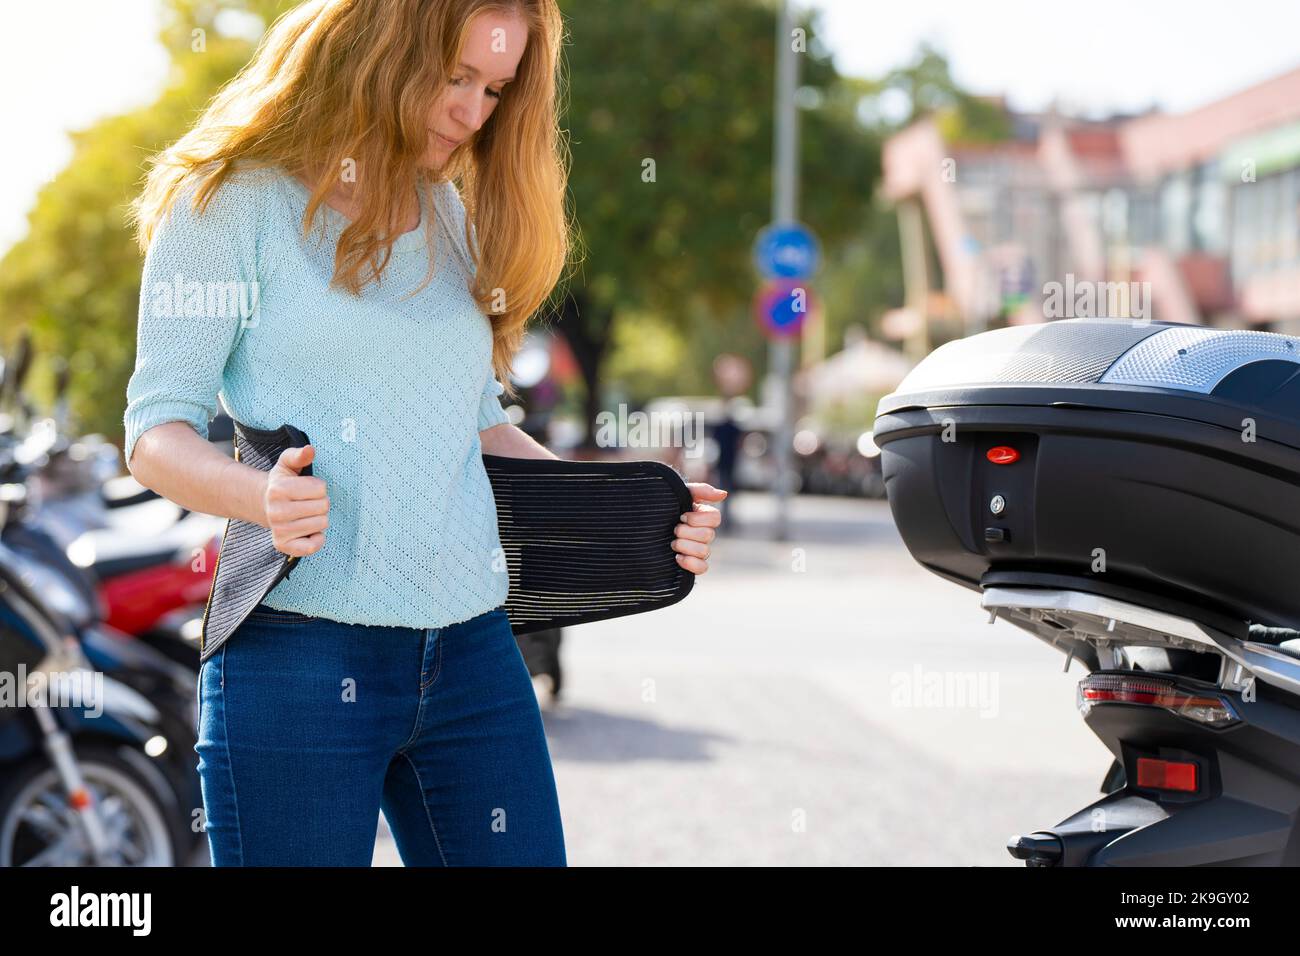 Redheaded woman puts on a girdle to ride a motorcycle Stock Photo